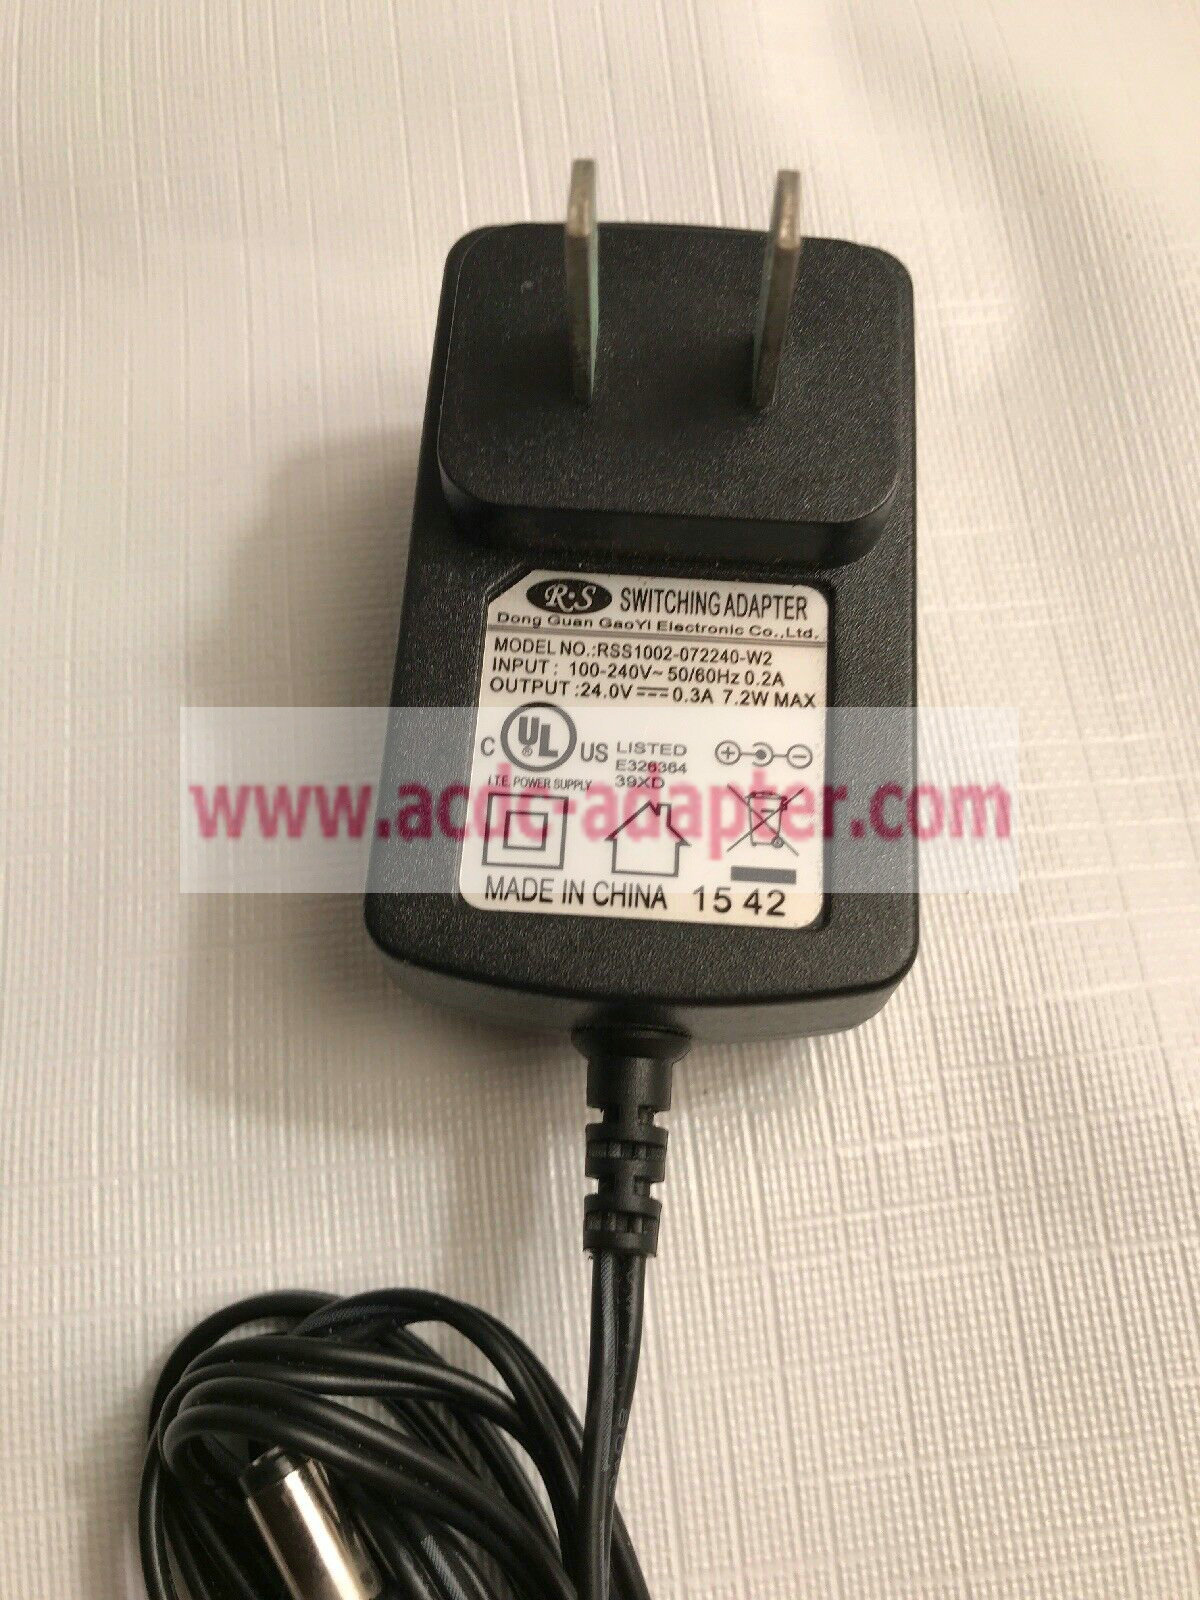 NEW AC Adapter Charger R-S RSS1002-072240-W2 24VDC 0.3A Power supply - Click Image to Close